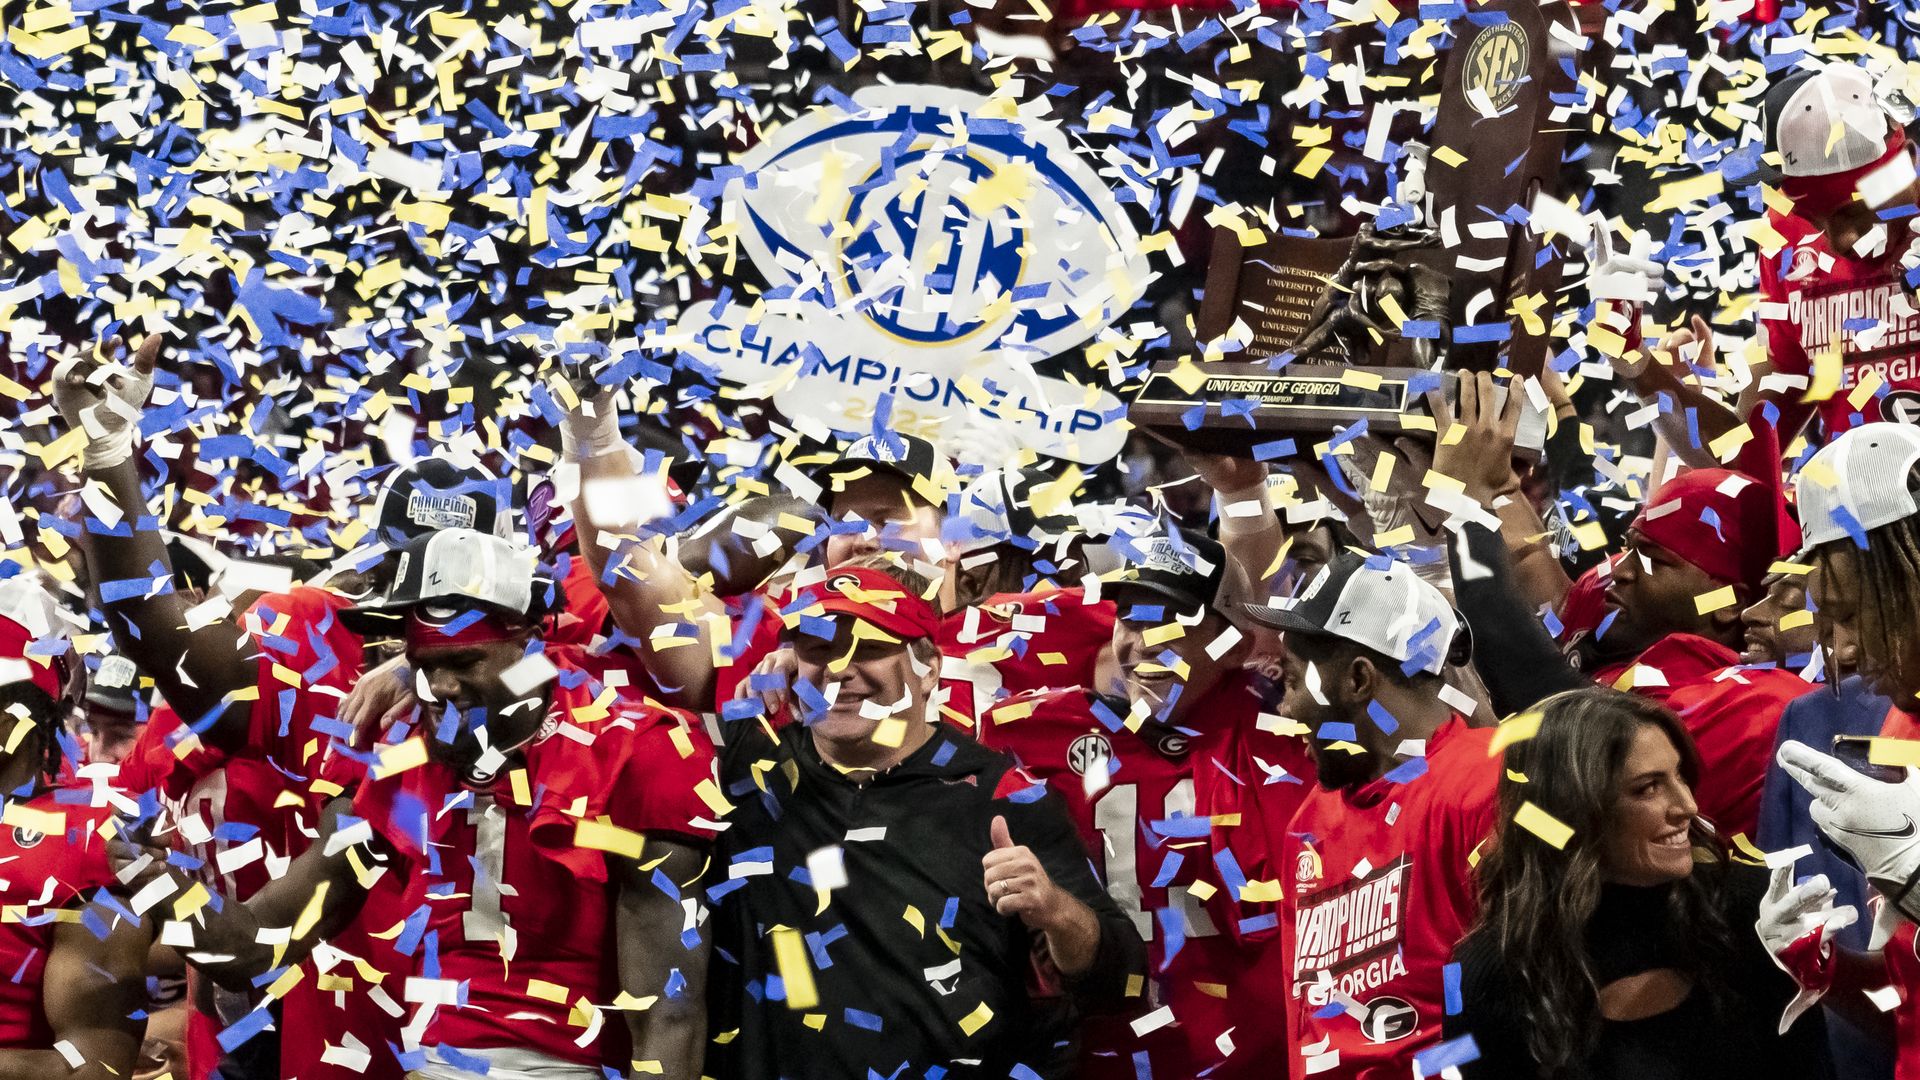 confetti falls around the Georgia Bulldogs as they hold up the SEC championship trophy